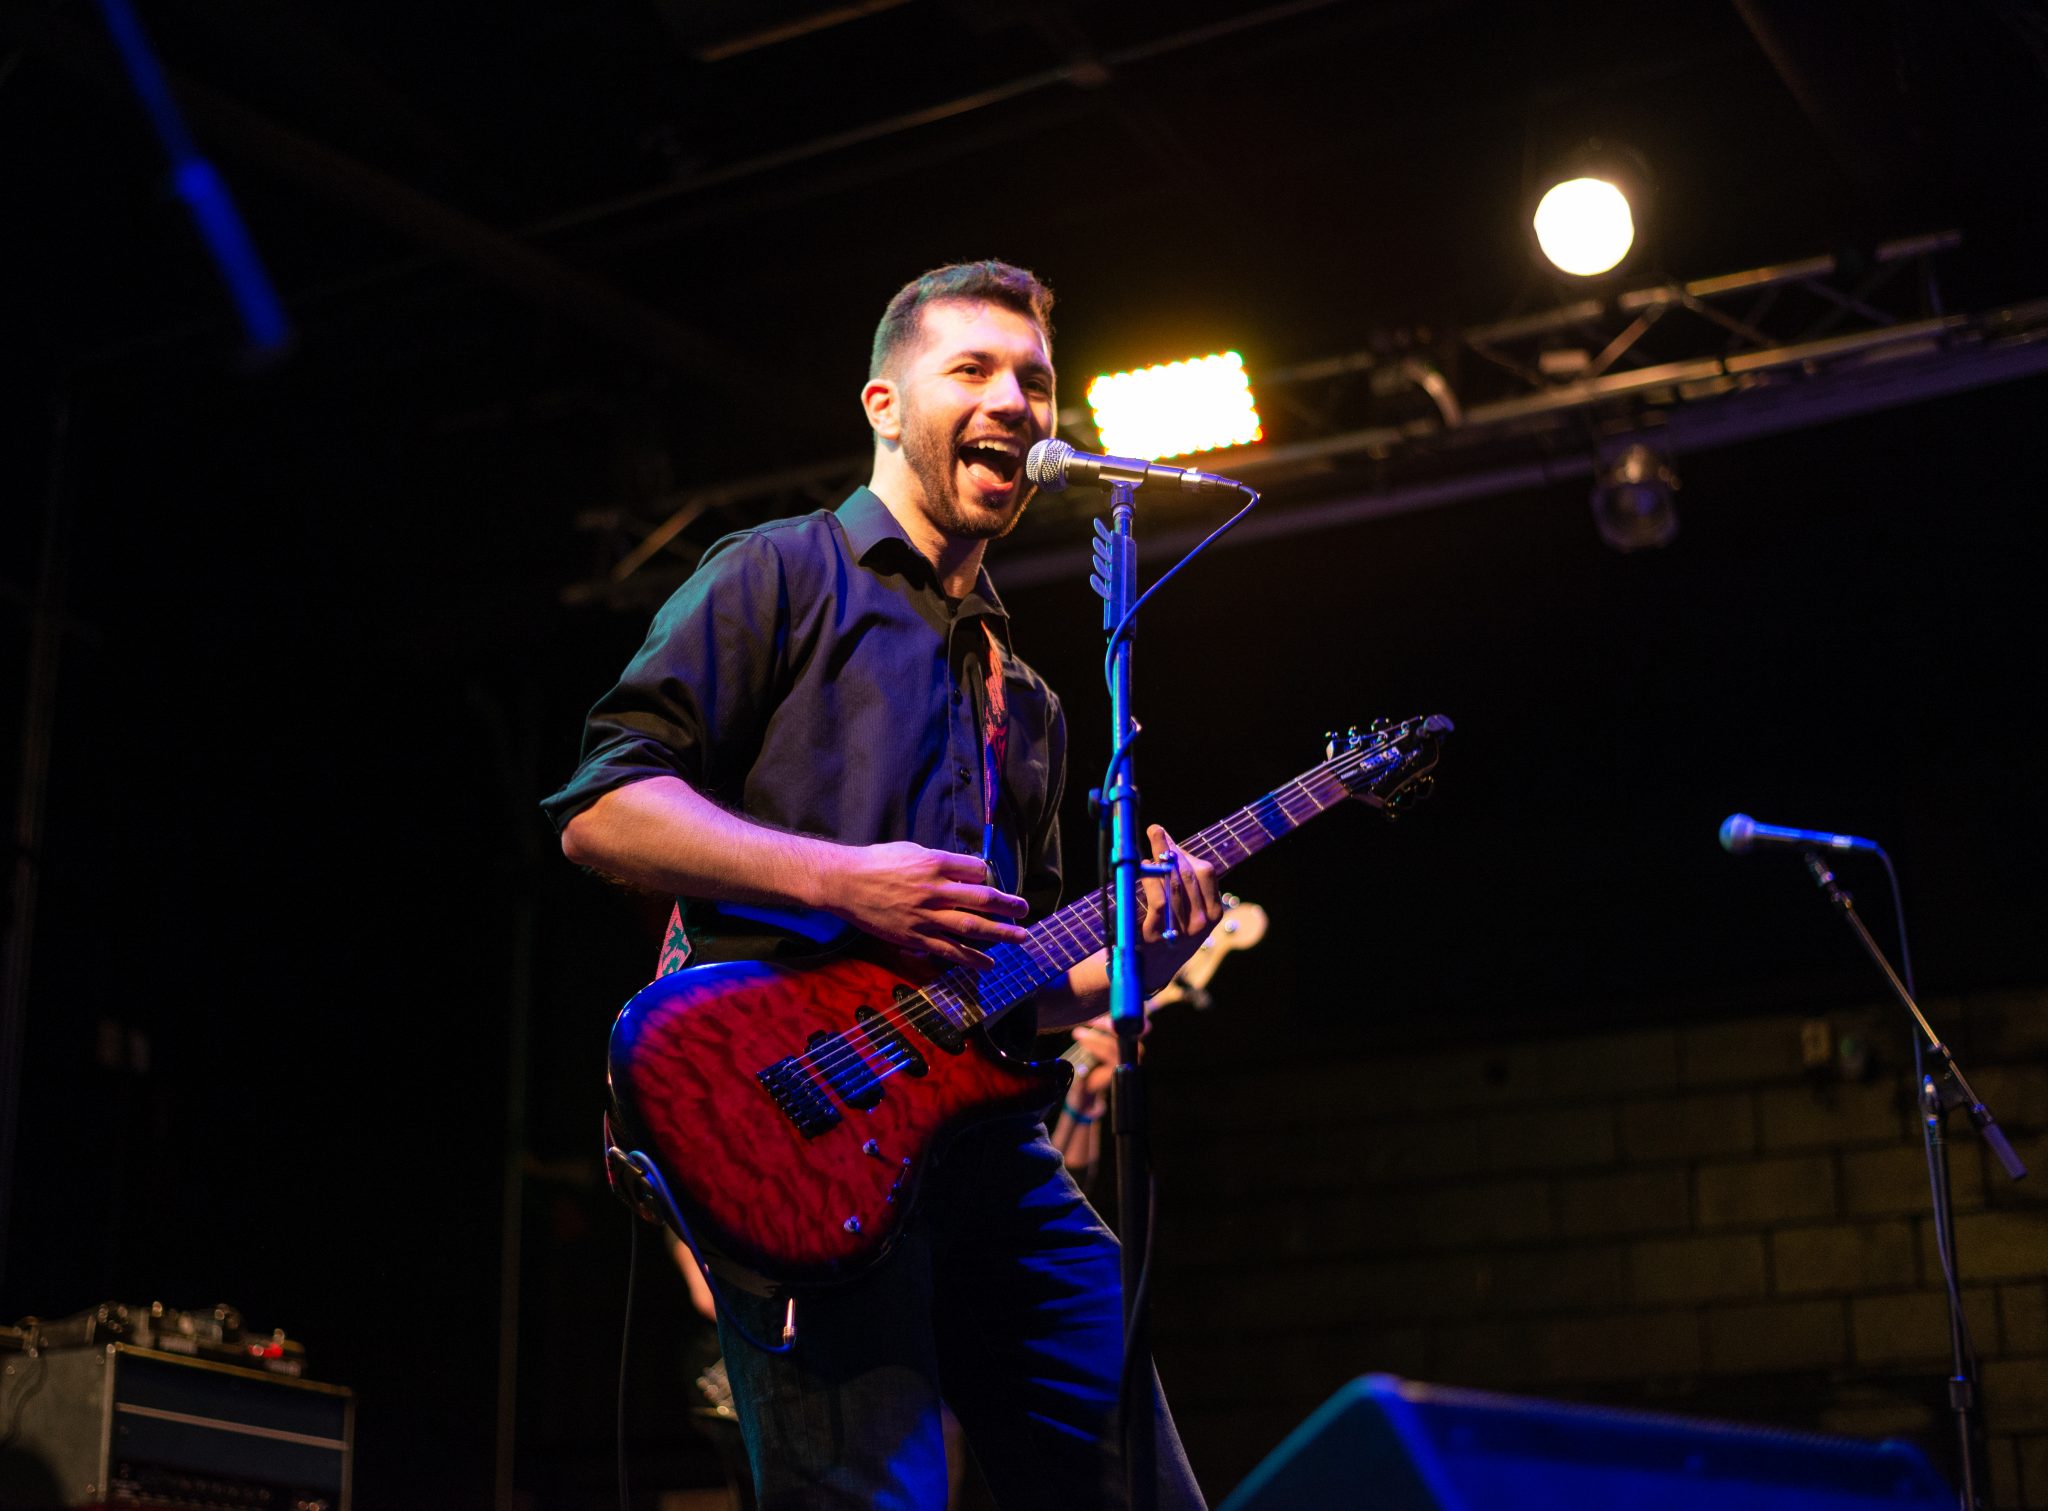 Bryce Kalal singing and playing a red guitar on stage at The Garage. He's smiling as he looks out to the crowd.